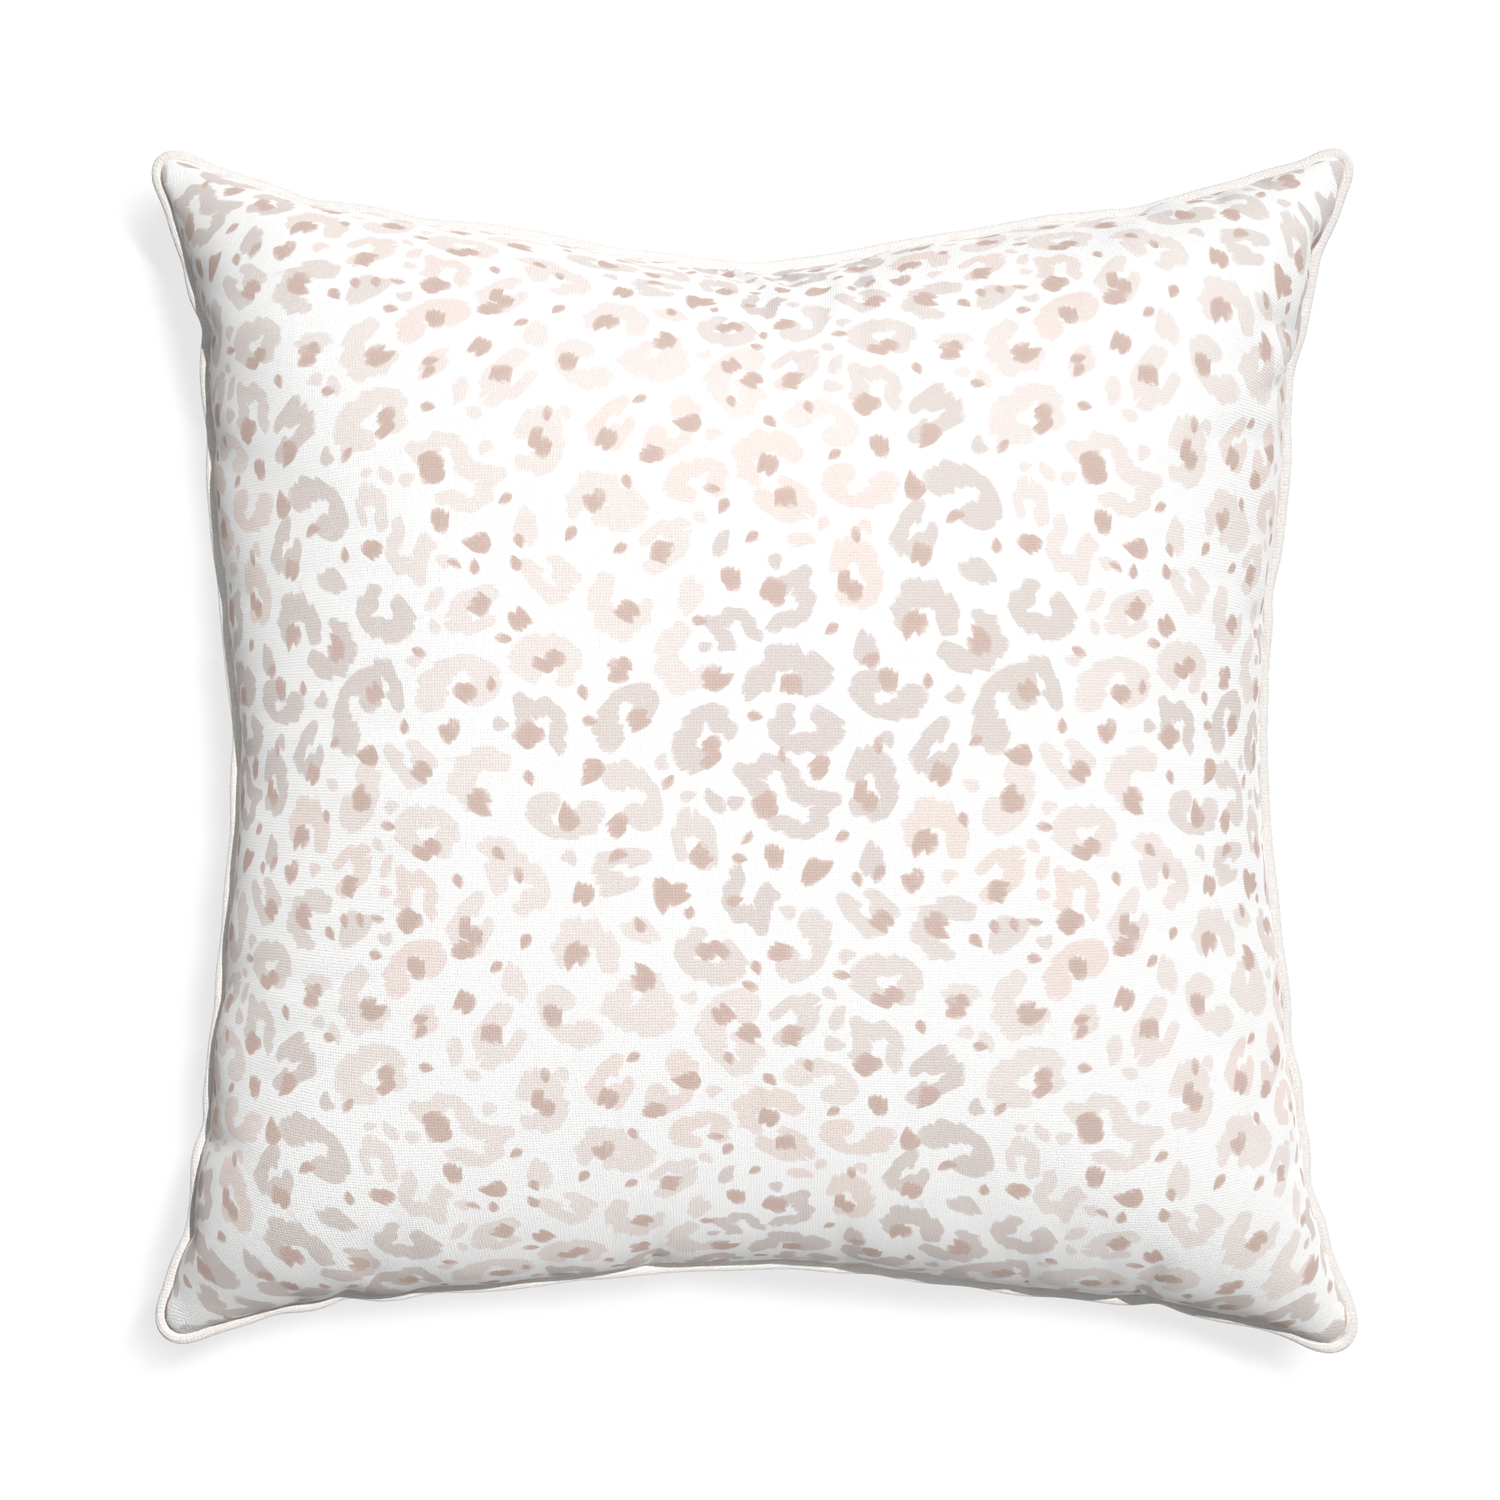 Euro-sham rosie custom beige animal printpillow with snow piping on white background